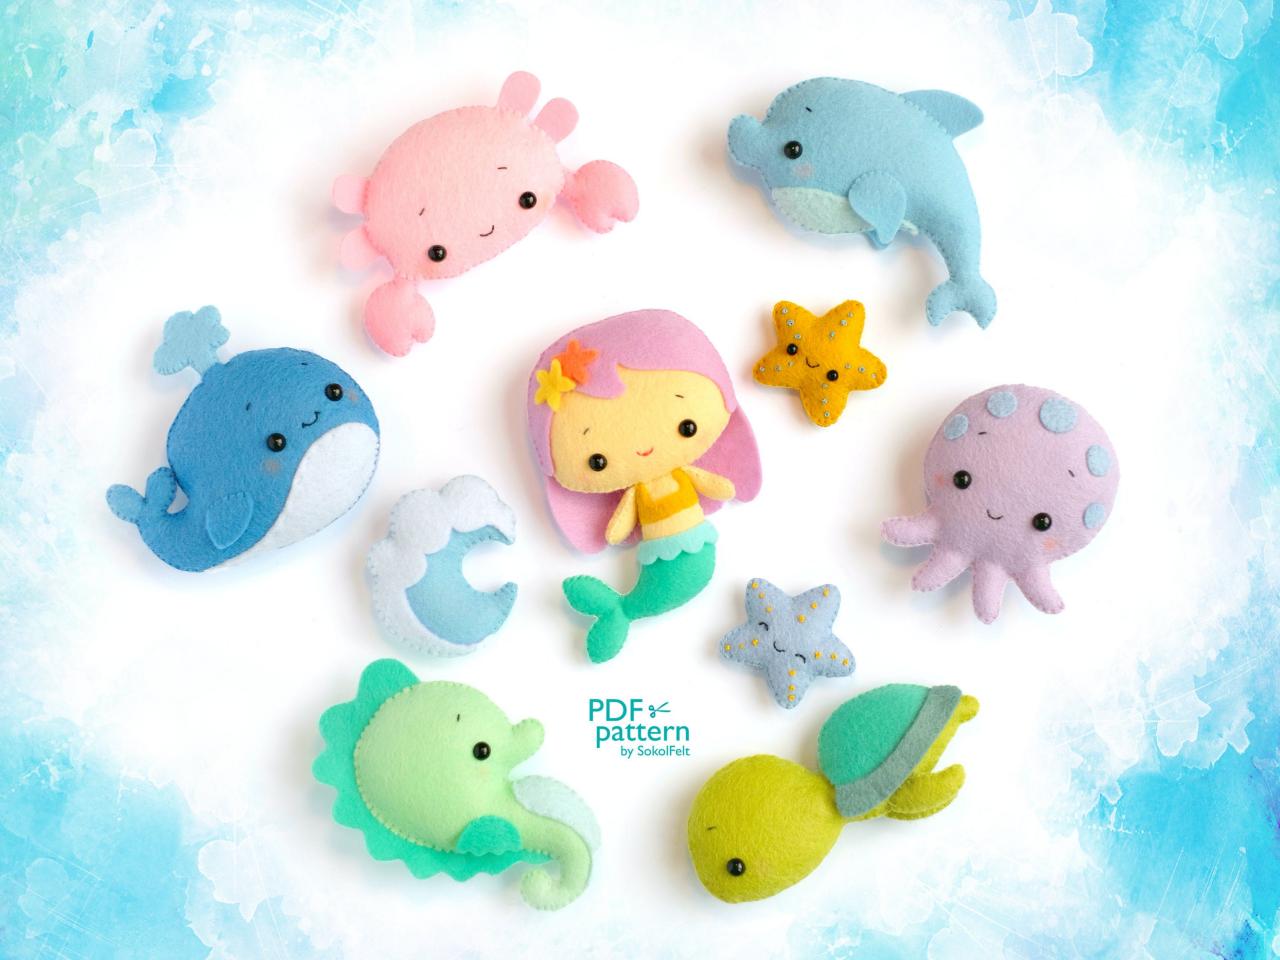 Sea Creatures Felt Toy Pdf And Svg Patterns, Sea Life Mobile, Mermaid, Whale, Seahorse, Octopus, Sea Turtle, Crab, Dolphin, Starfish, Wave